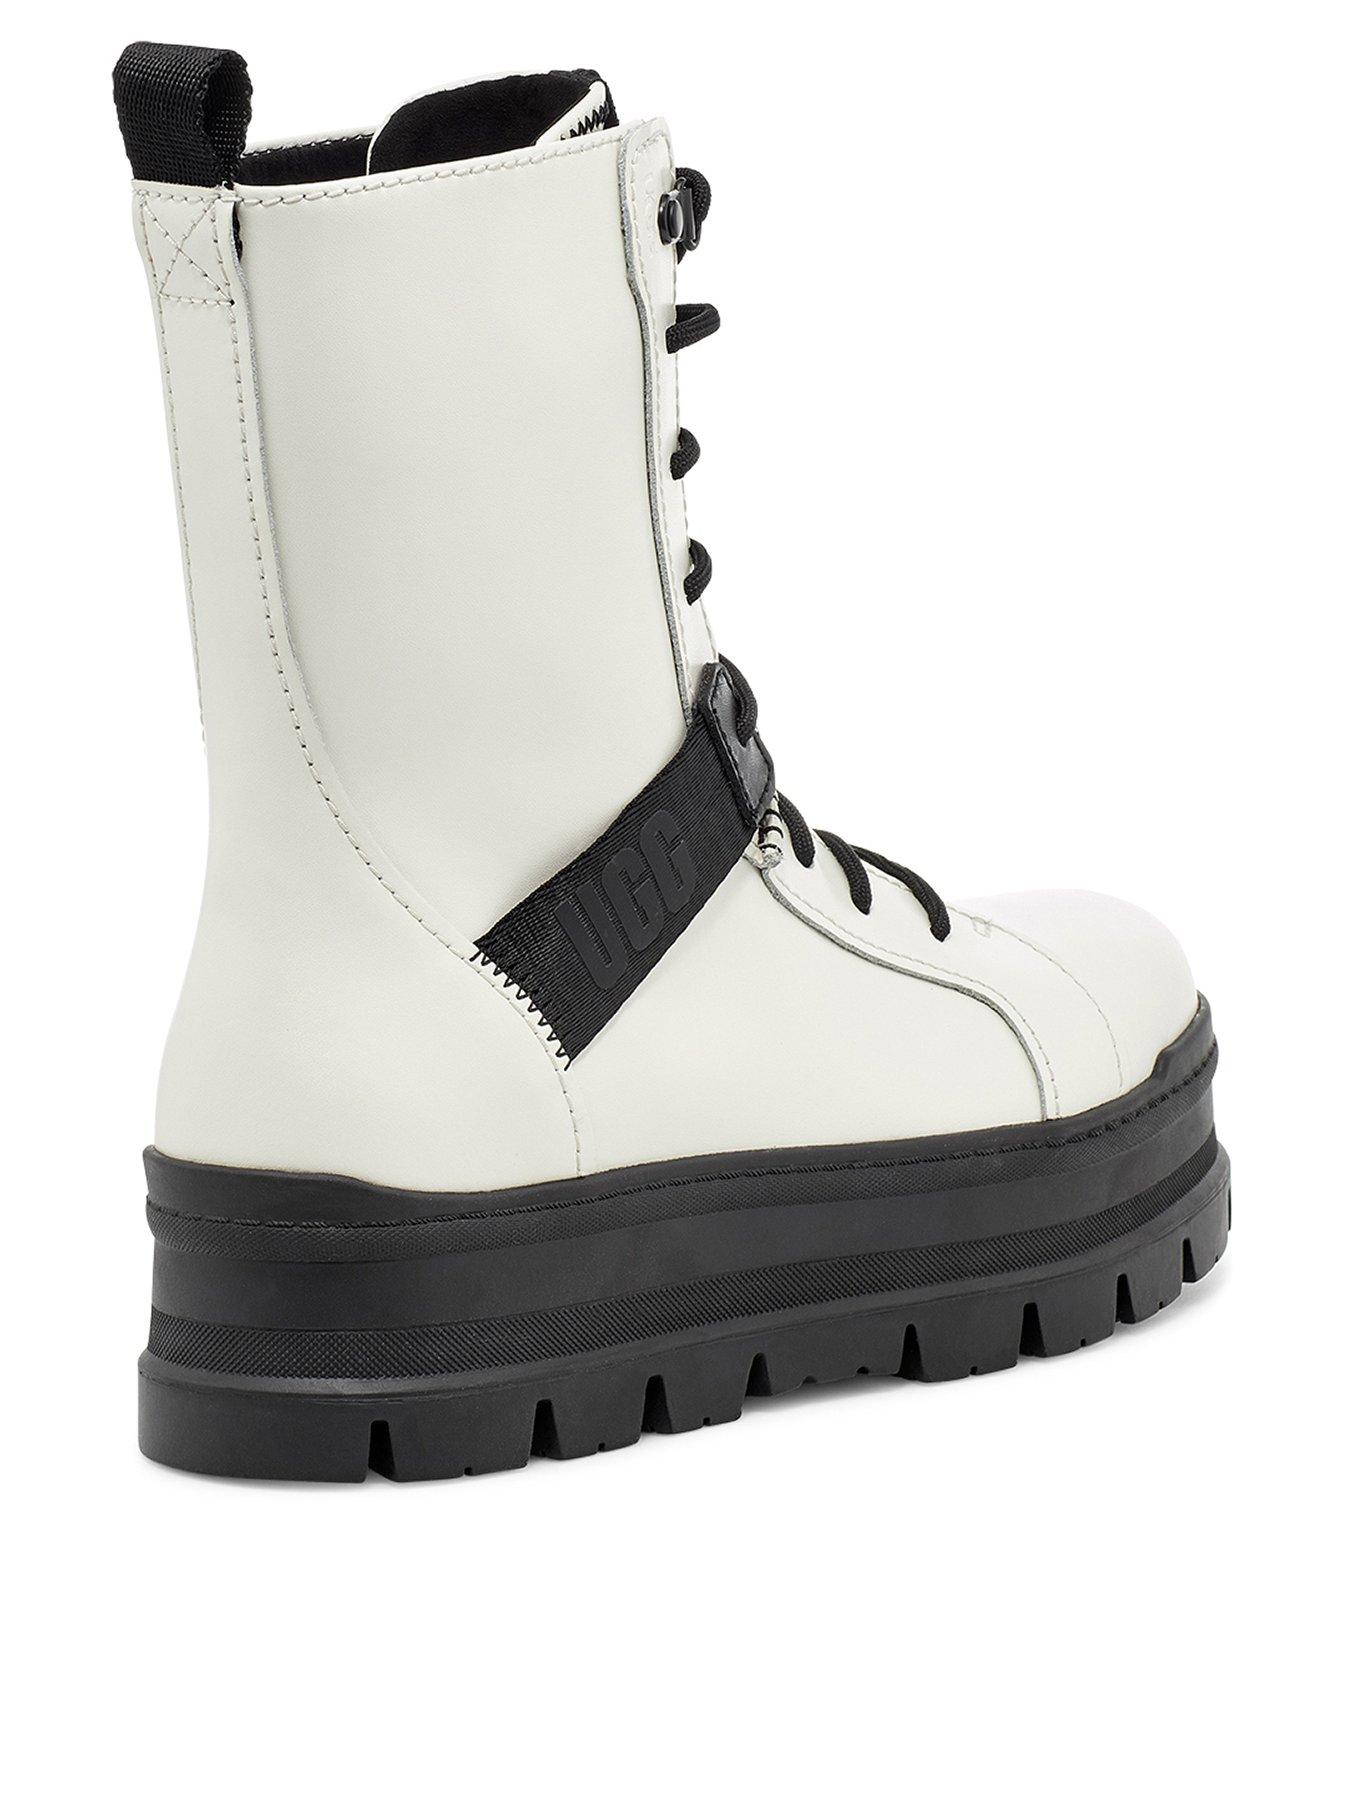 off white ugg boots